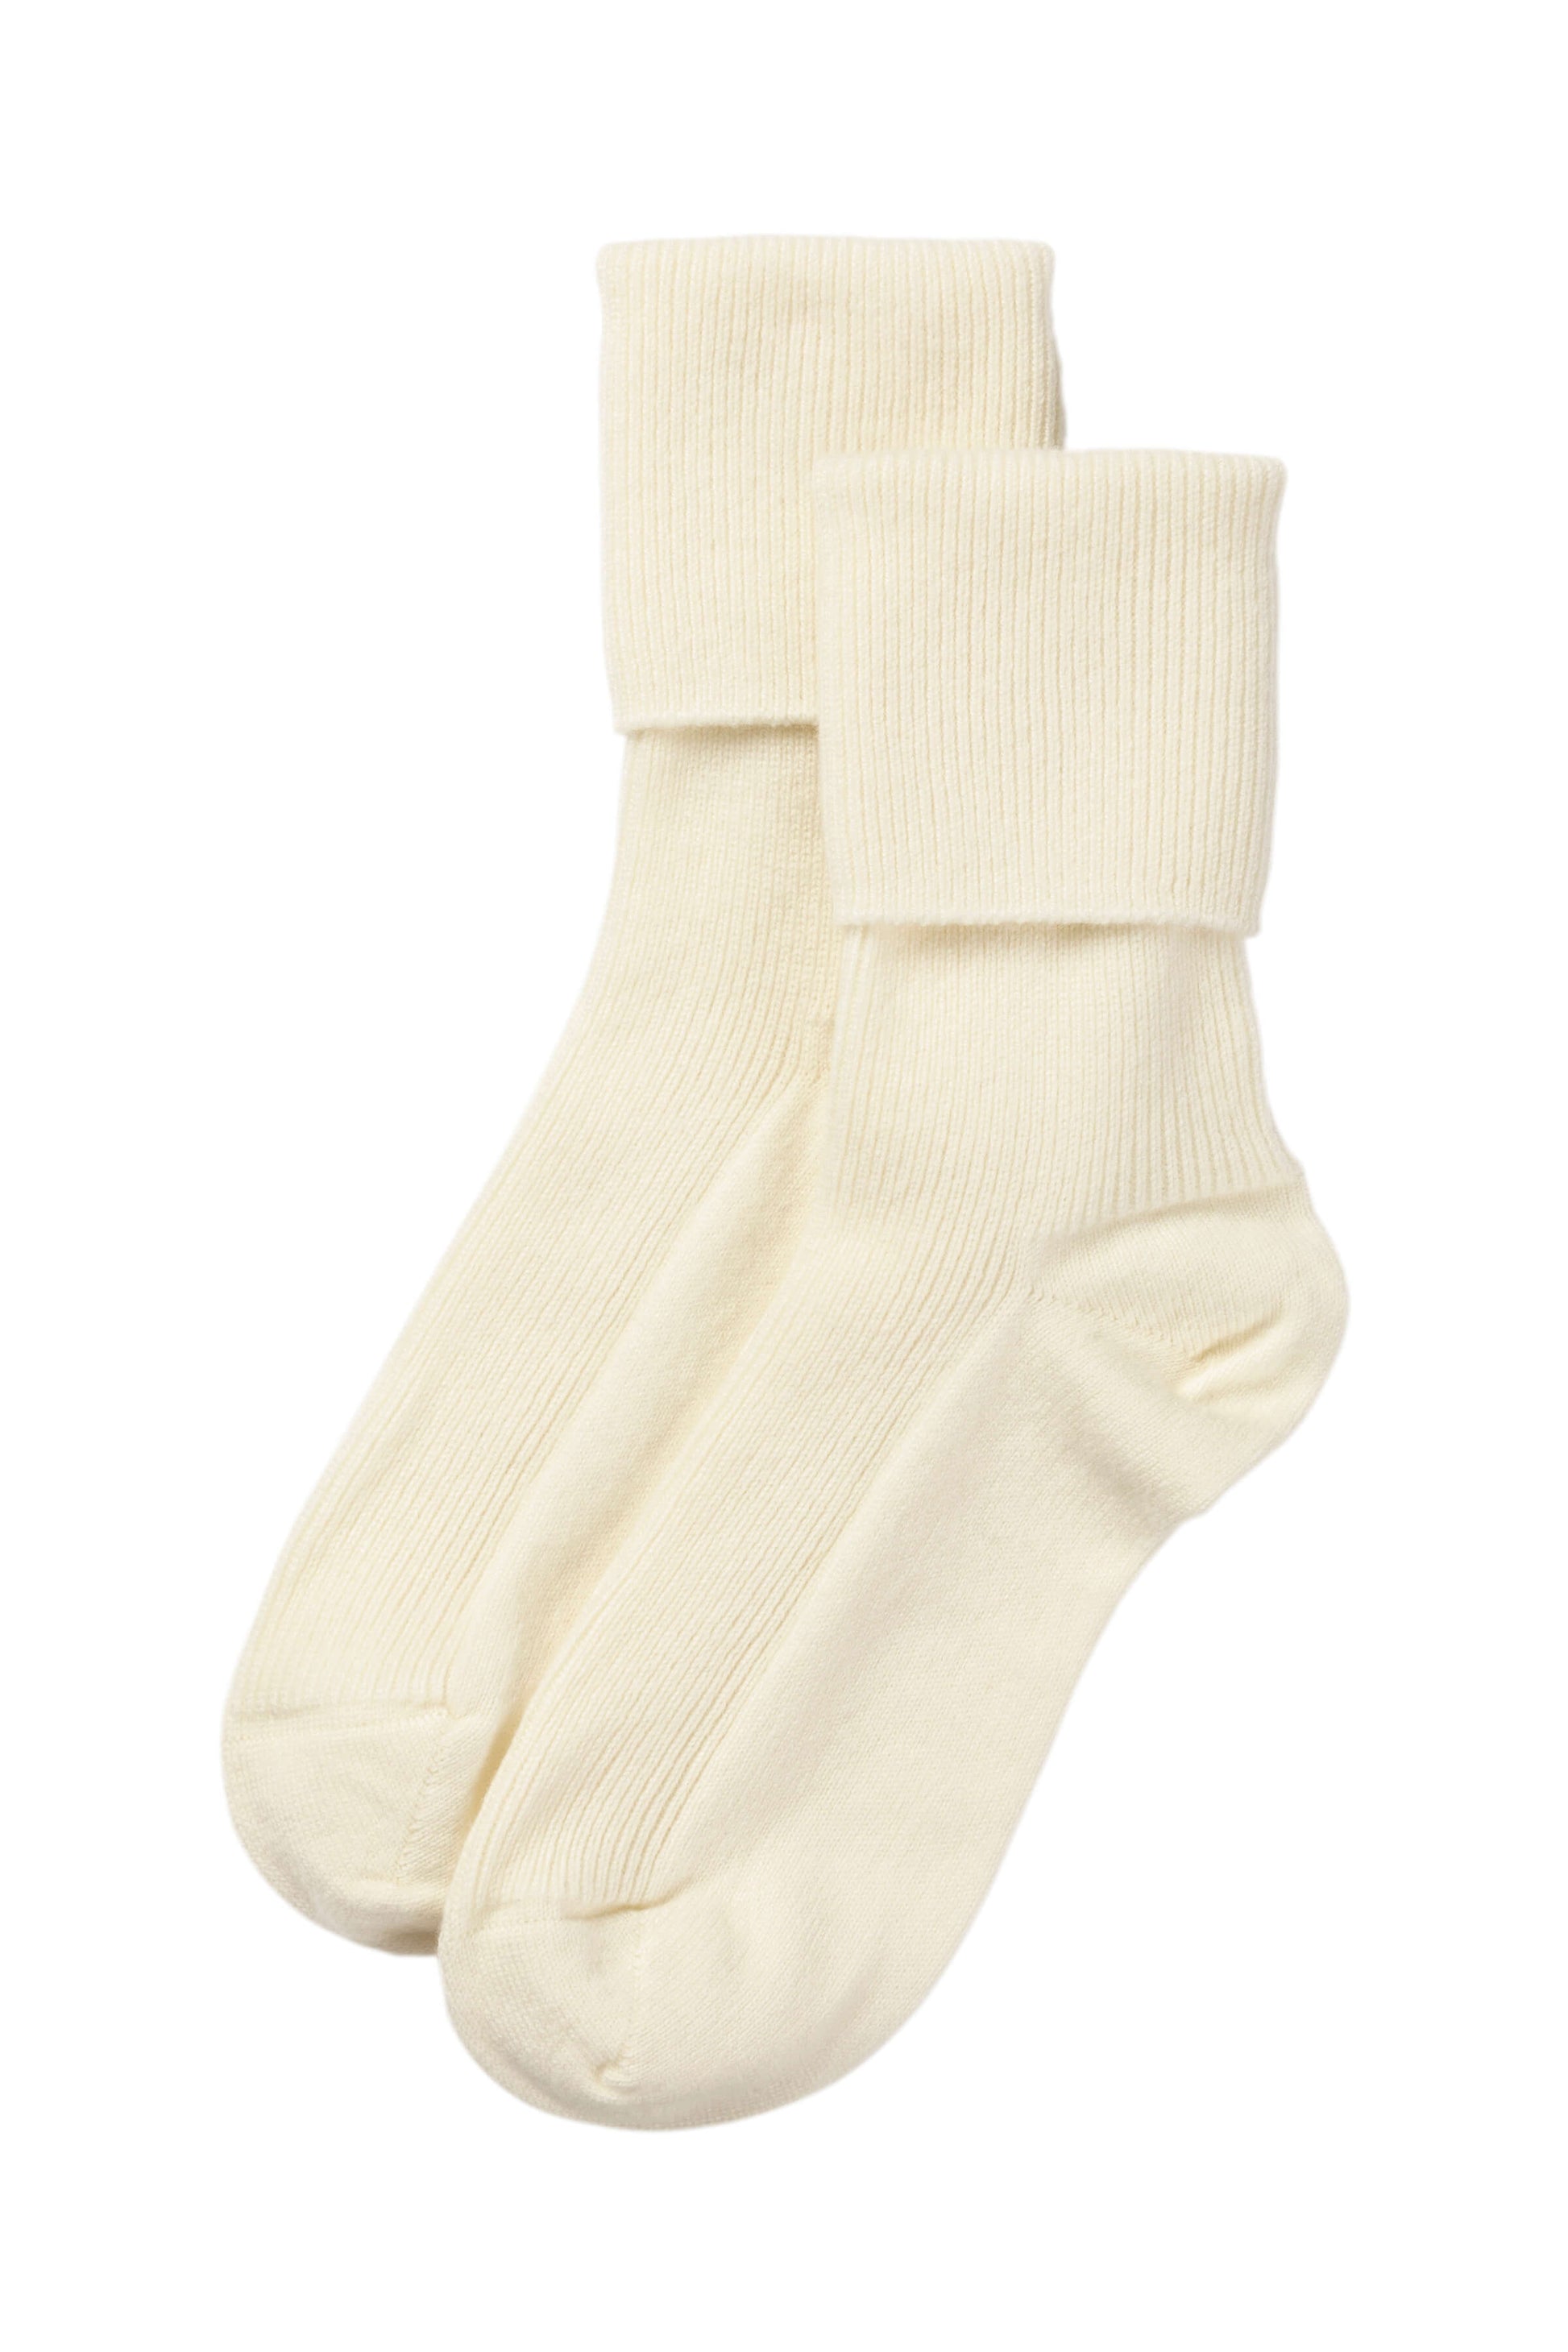 Johnstons of Elgin AW24 Knitted Accessory Luna Women's Cashmere Socks HBN00007SA1911ONE